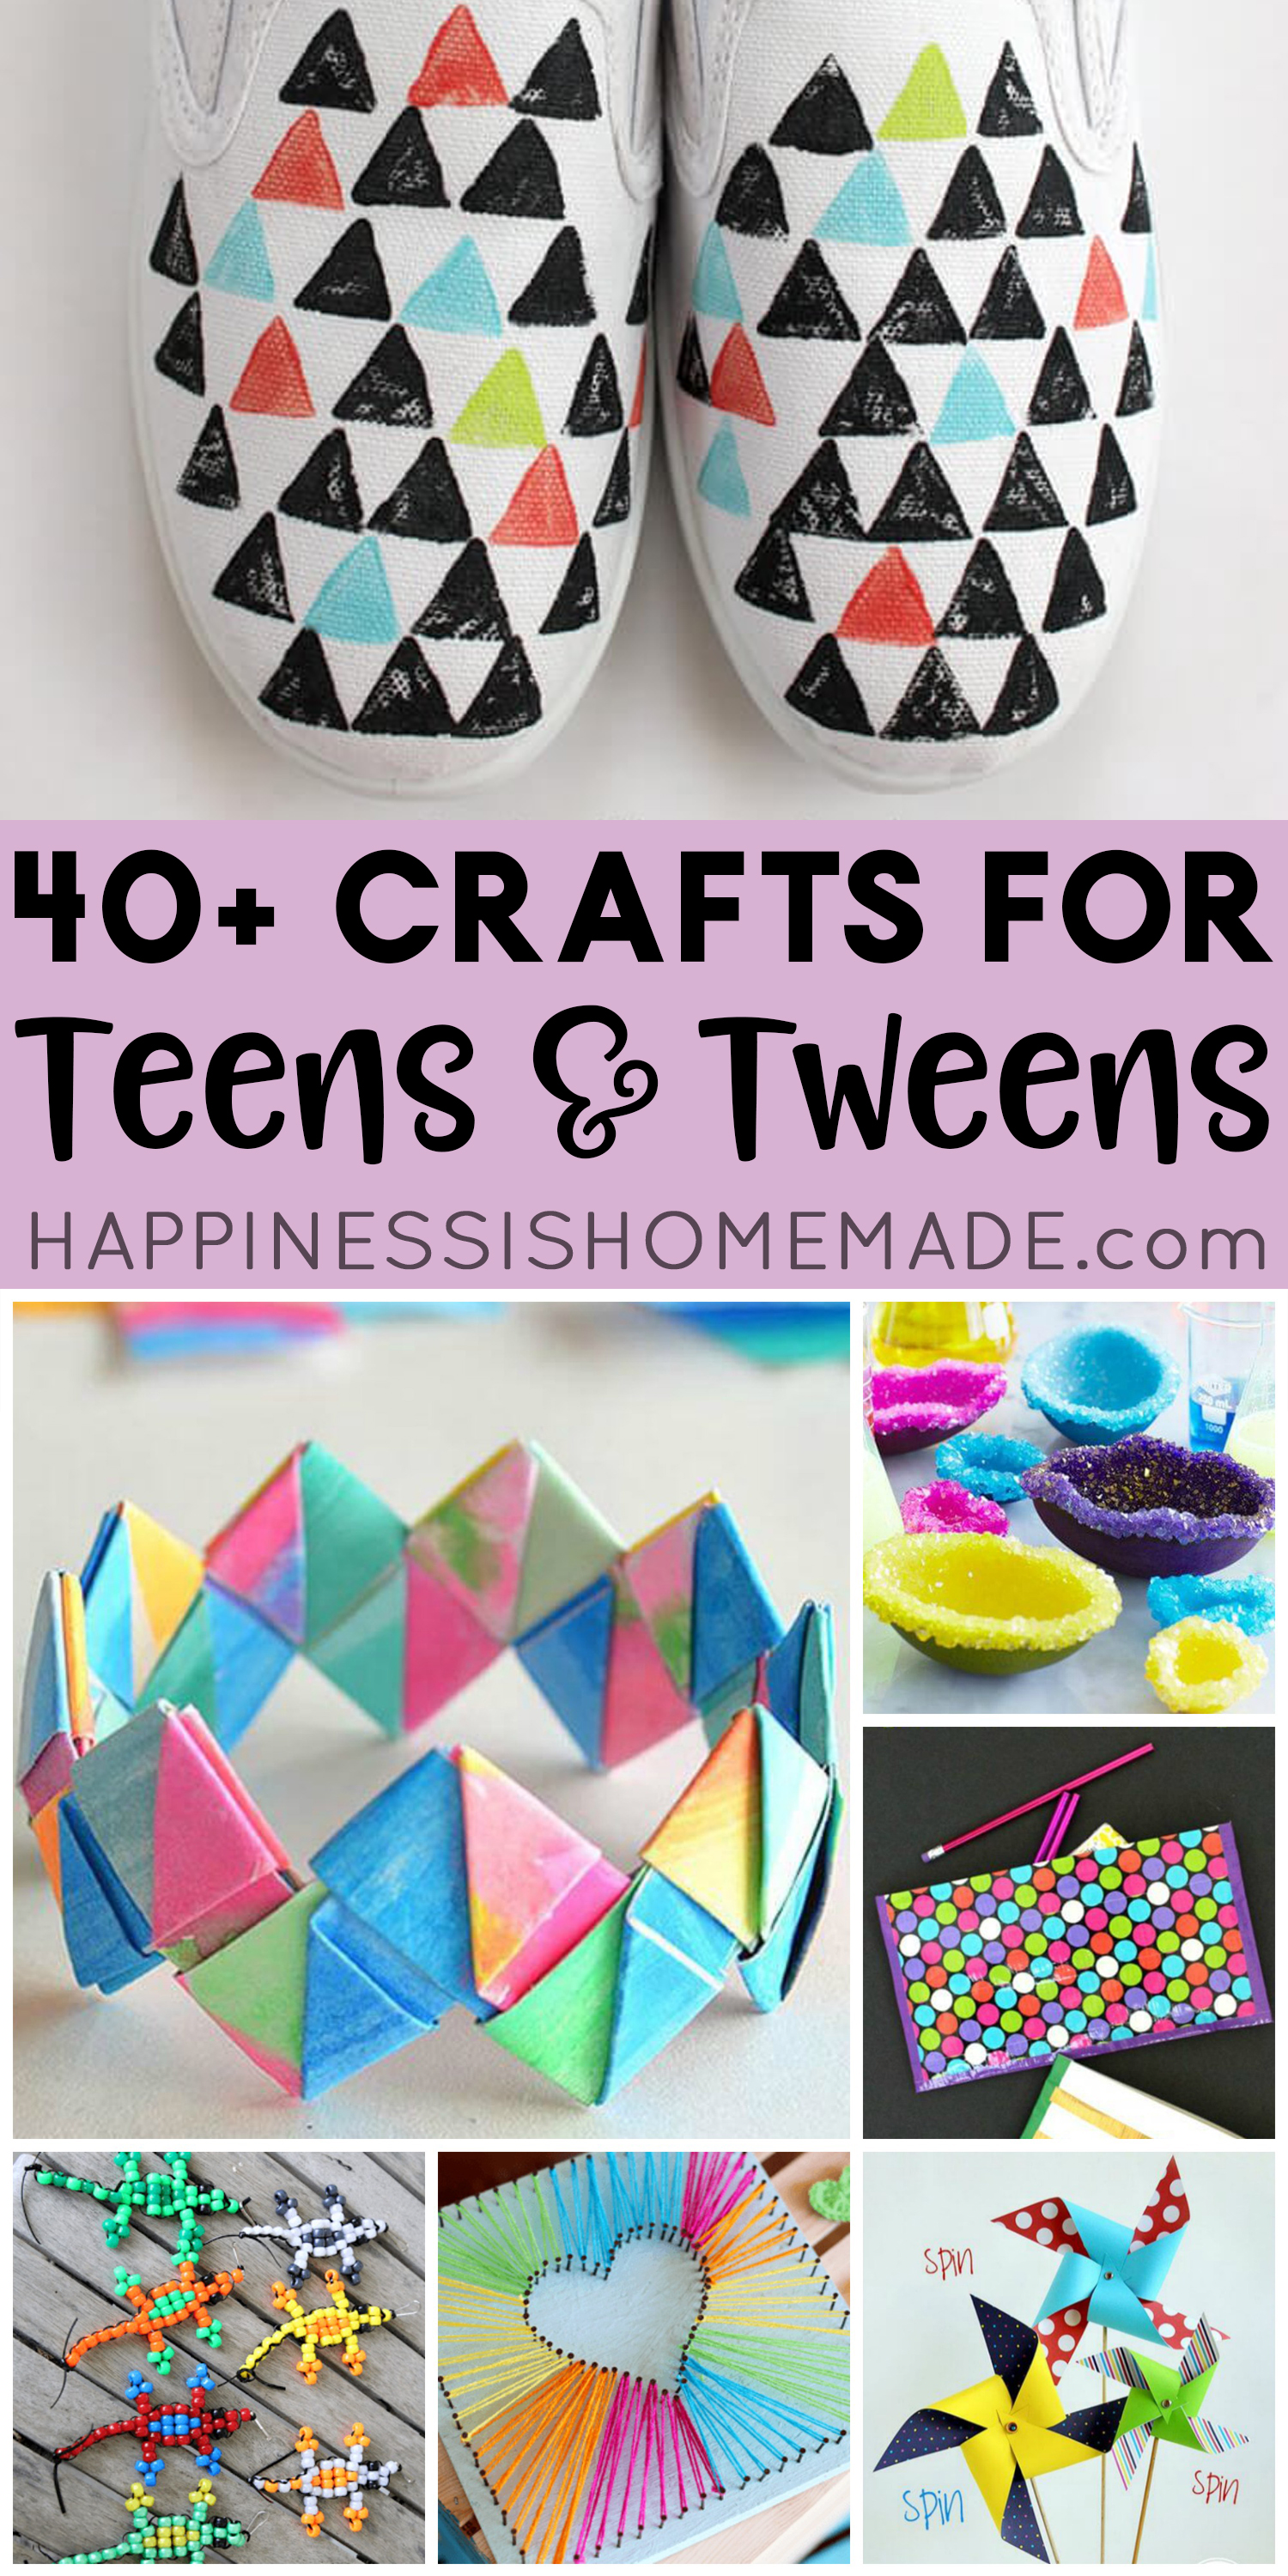 Crafts for Teens - 45 Fun Crafts for Teens